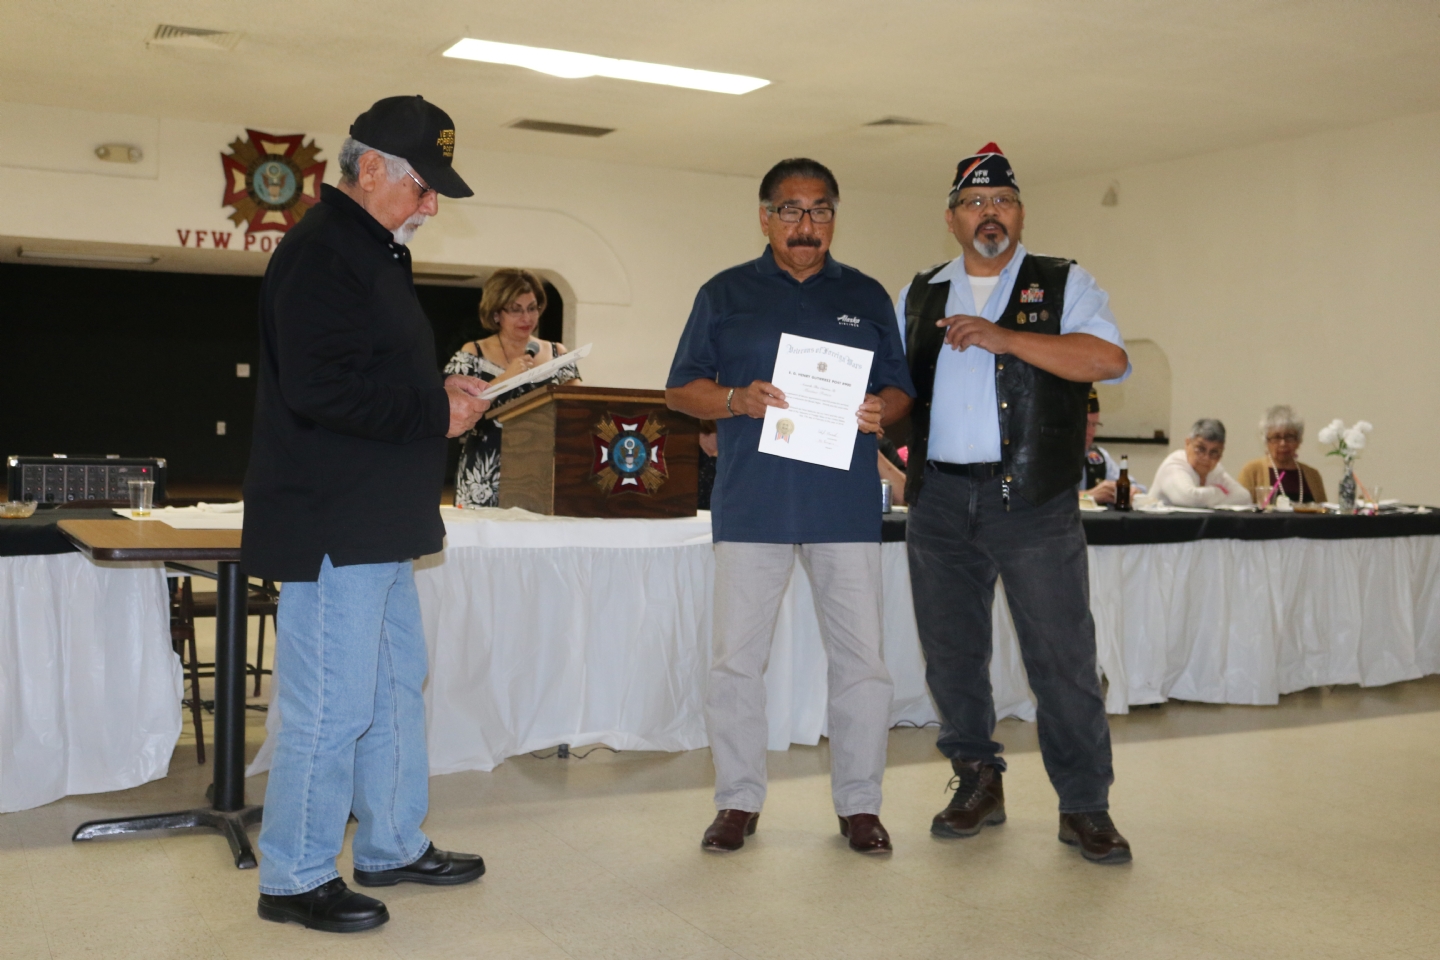 Commander Fernandez presents awards to Ralph Guerra and Max Franco for conducting the Post's Steak Nights in the Spring and Summer.